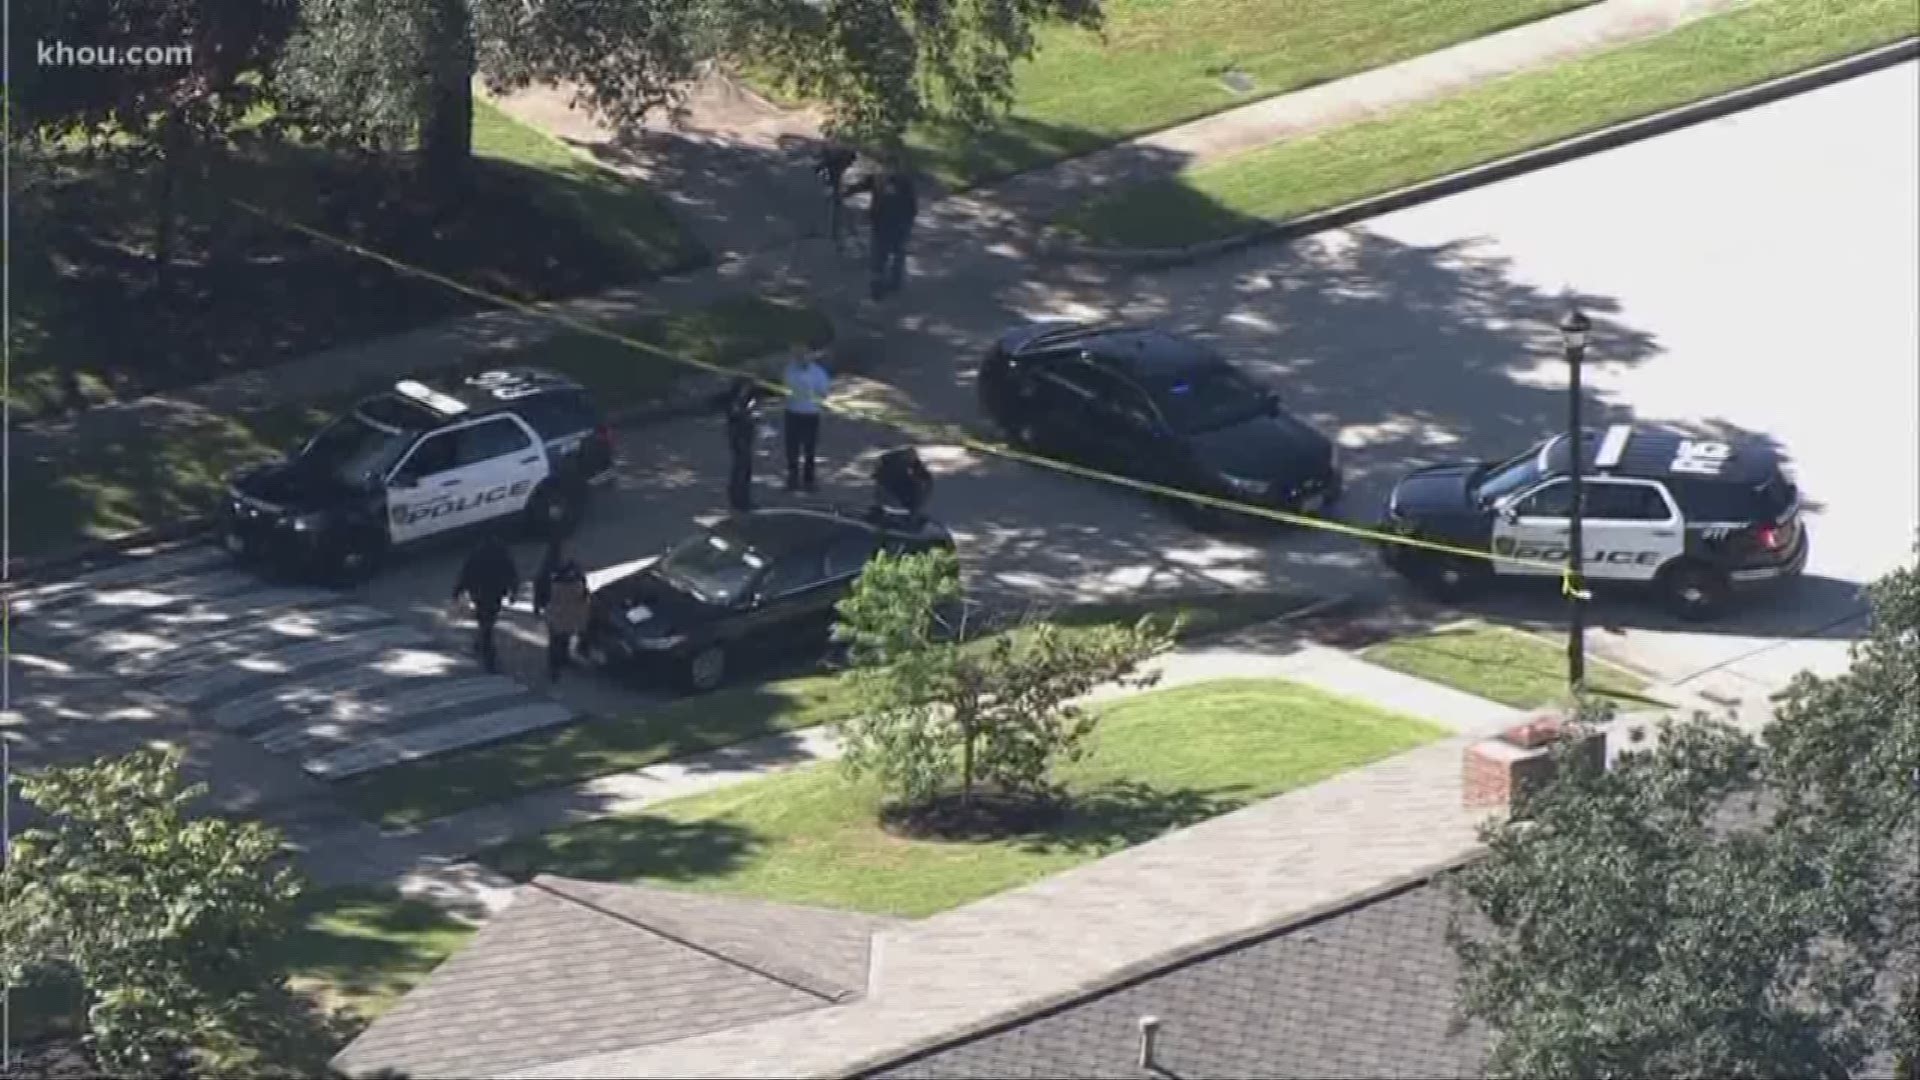 KHOU 11's Shern-Min Chow reports on a reported drive-by shooting in a southwest Houston neighborhood.